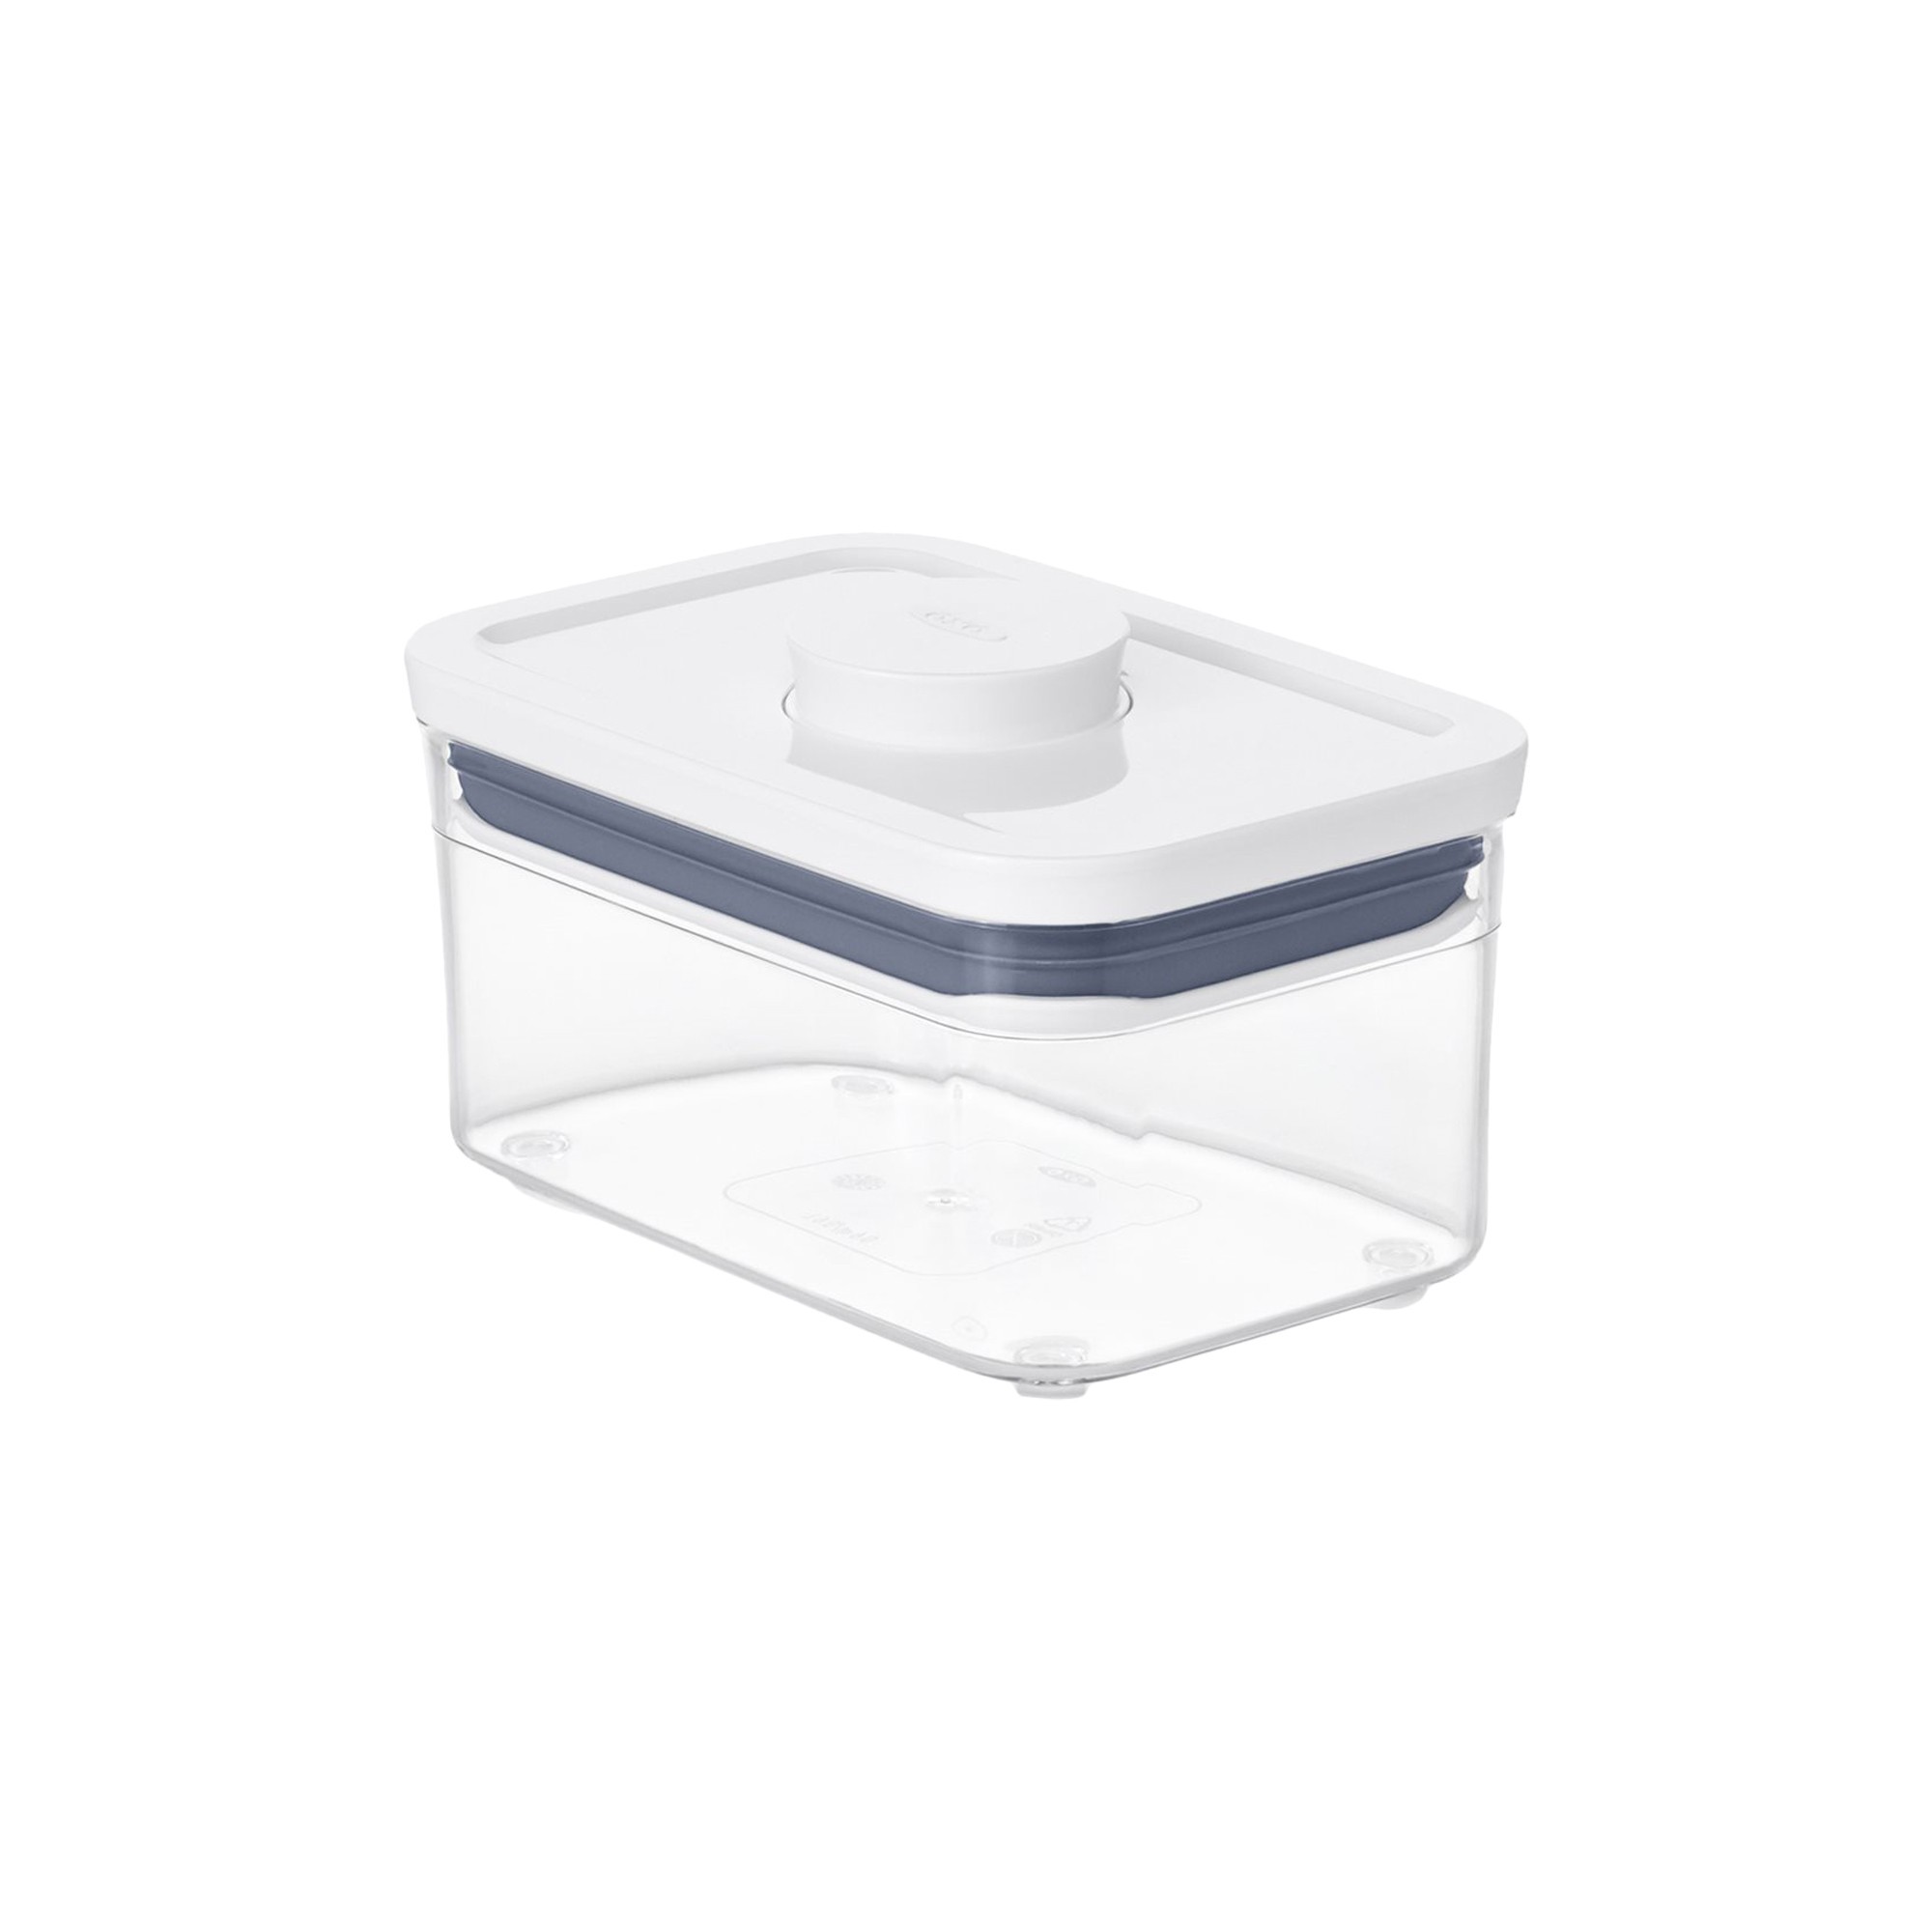 Cereal container, plastic, 11 x 26 x 27 cm, 3.2 l - OXO